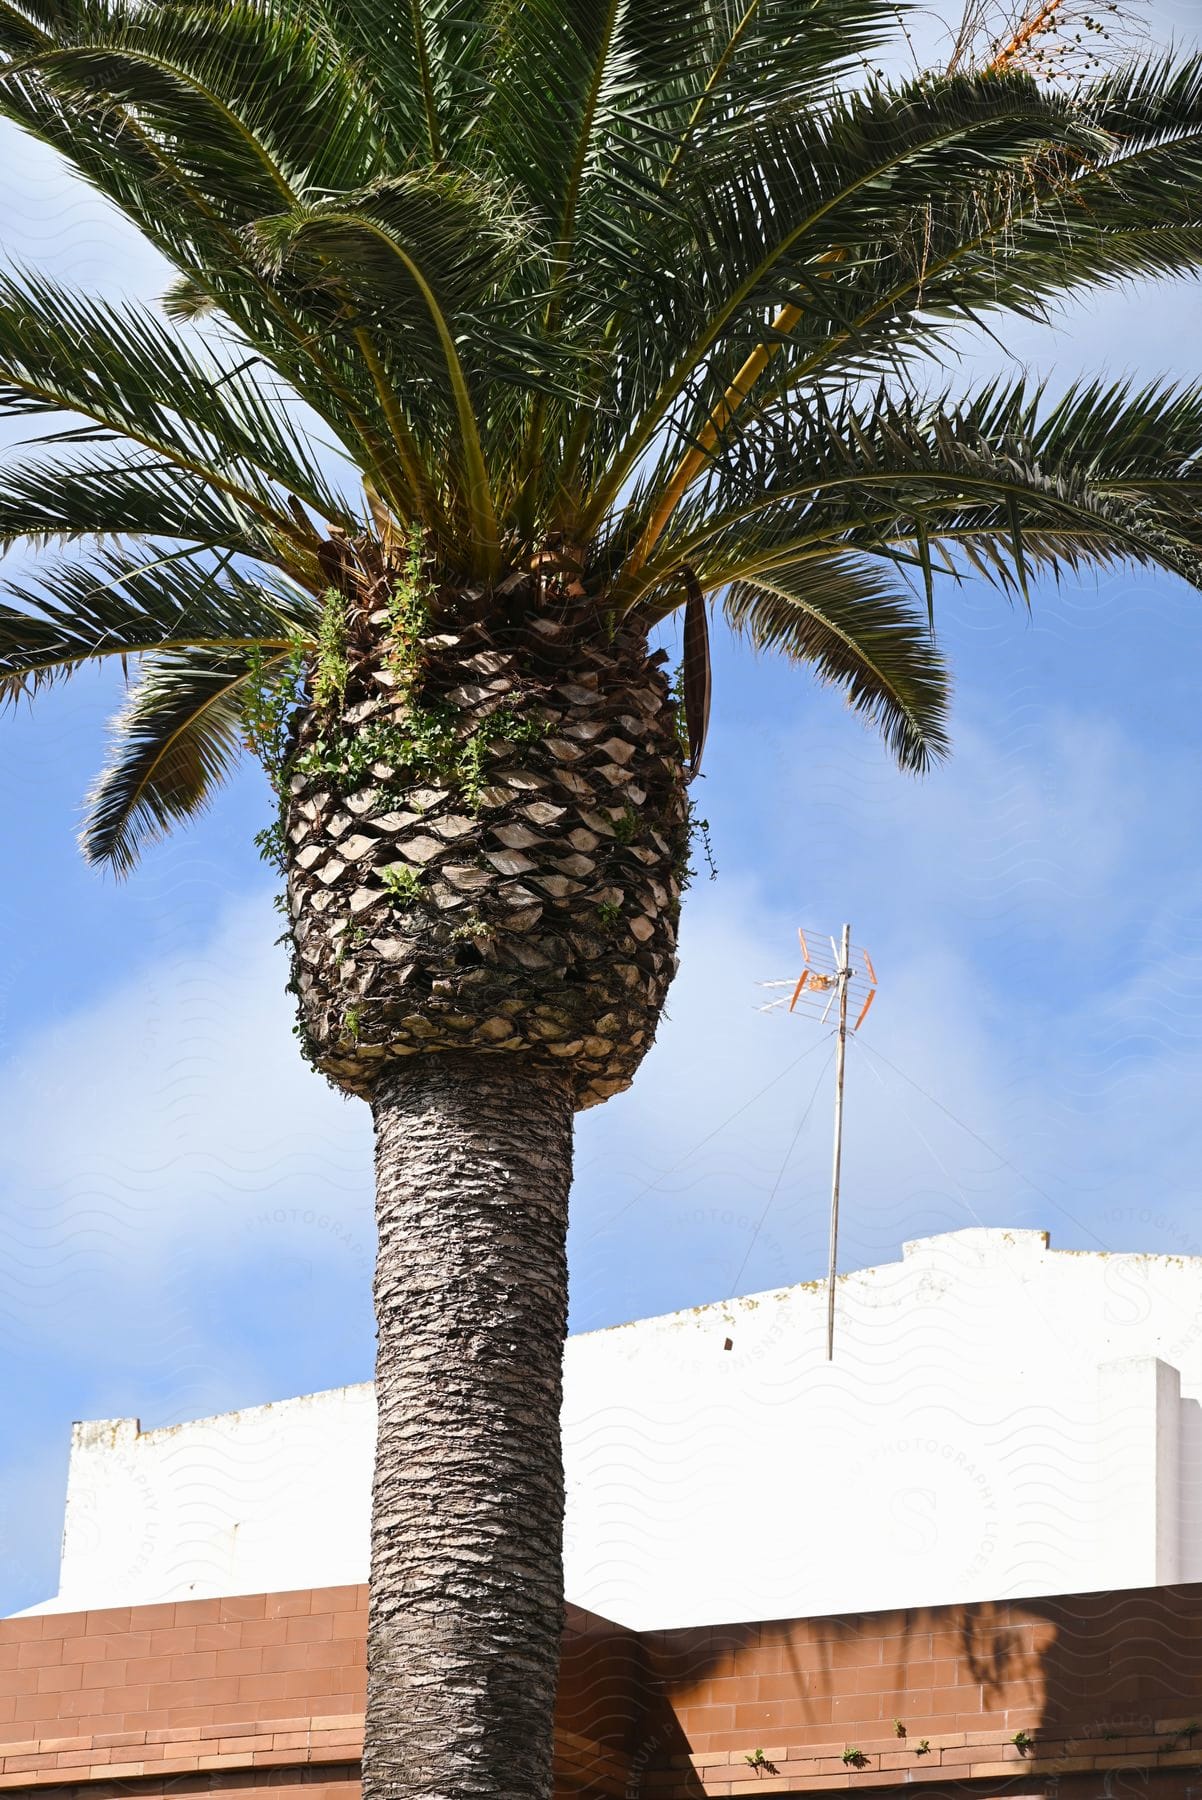 Palm tree standing near a building